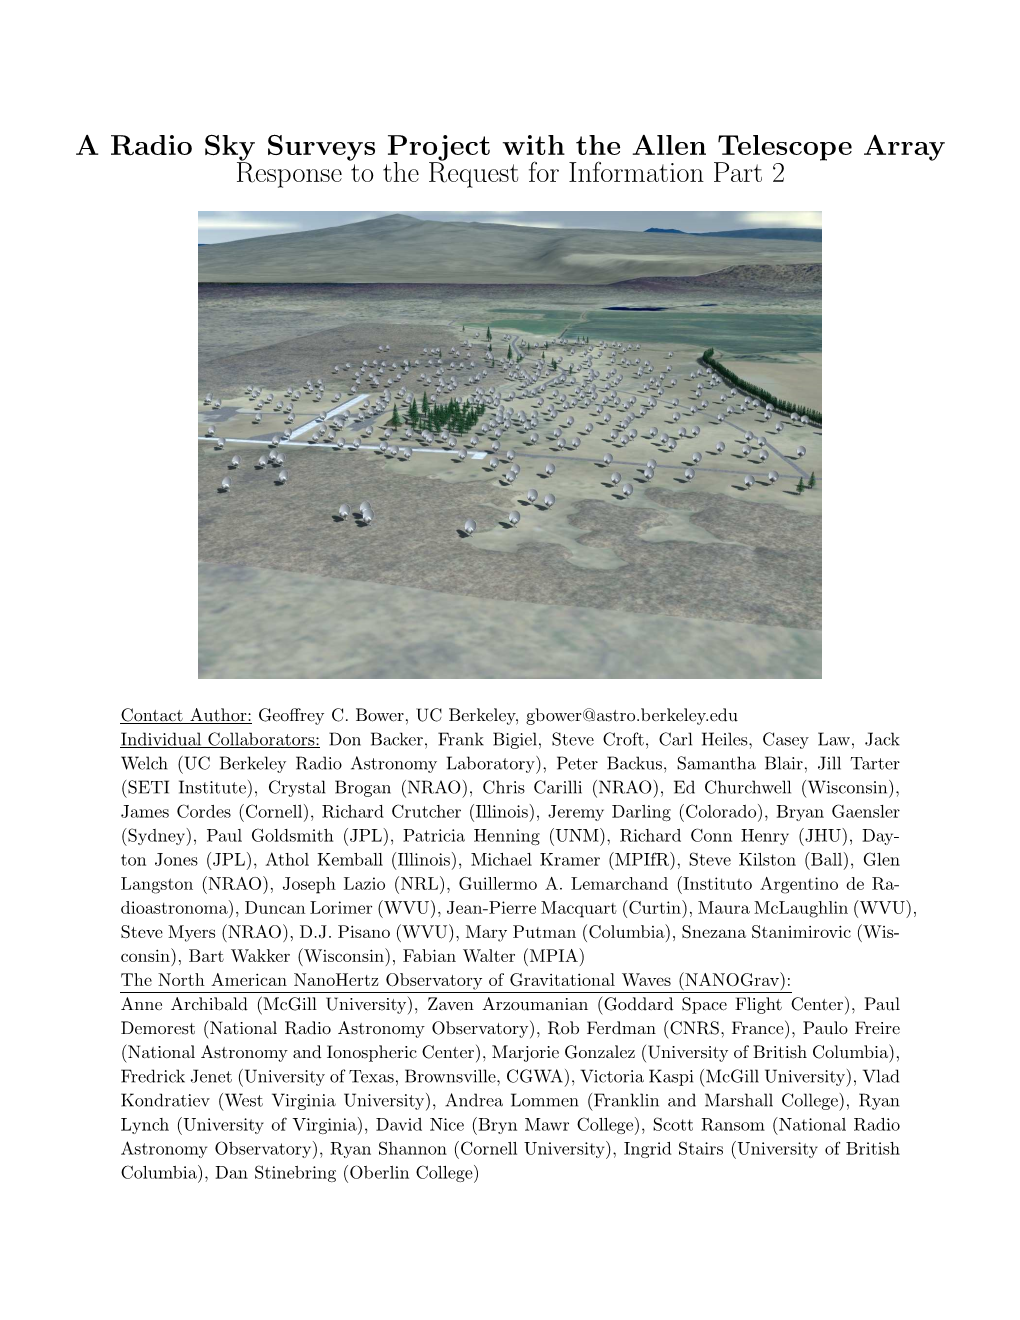 A Radio Sky Surveys Project with the Allen Telescope Array Response to the Request for Information Part 2